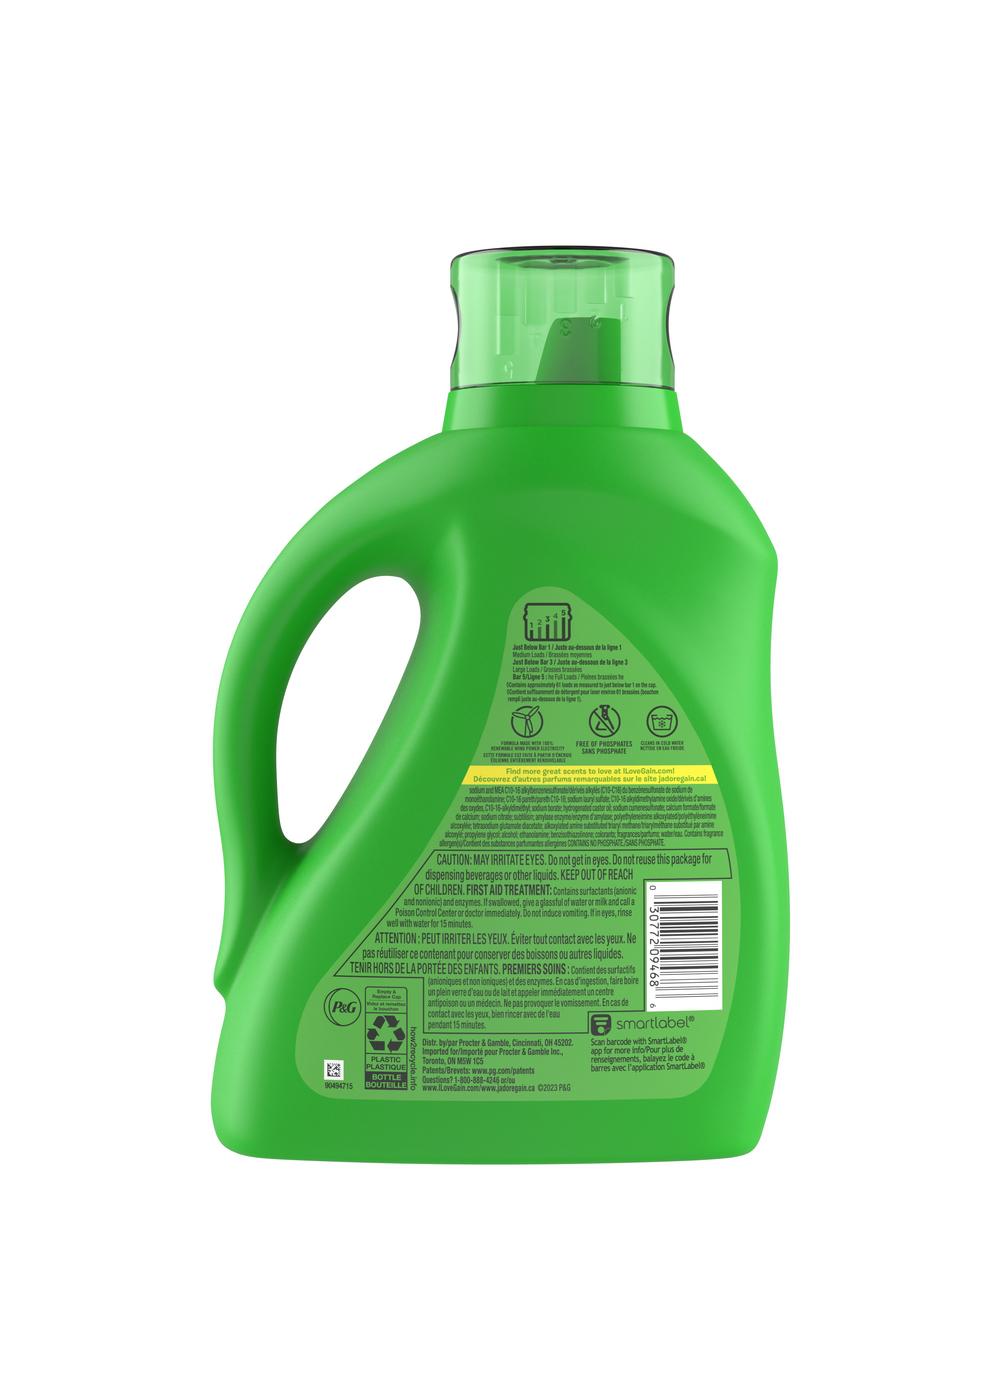 Gain + Aroma Boost HE Liquid Laundry Detergent, 61 Loads - Spring Daydream; image 7 of 8